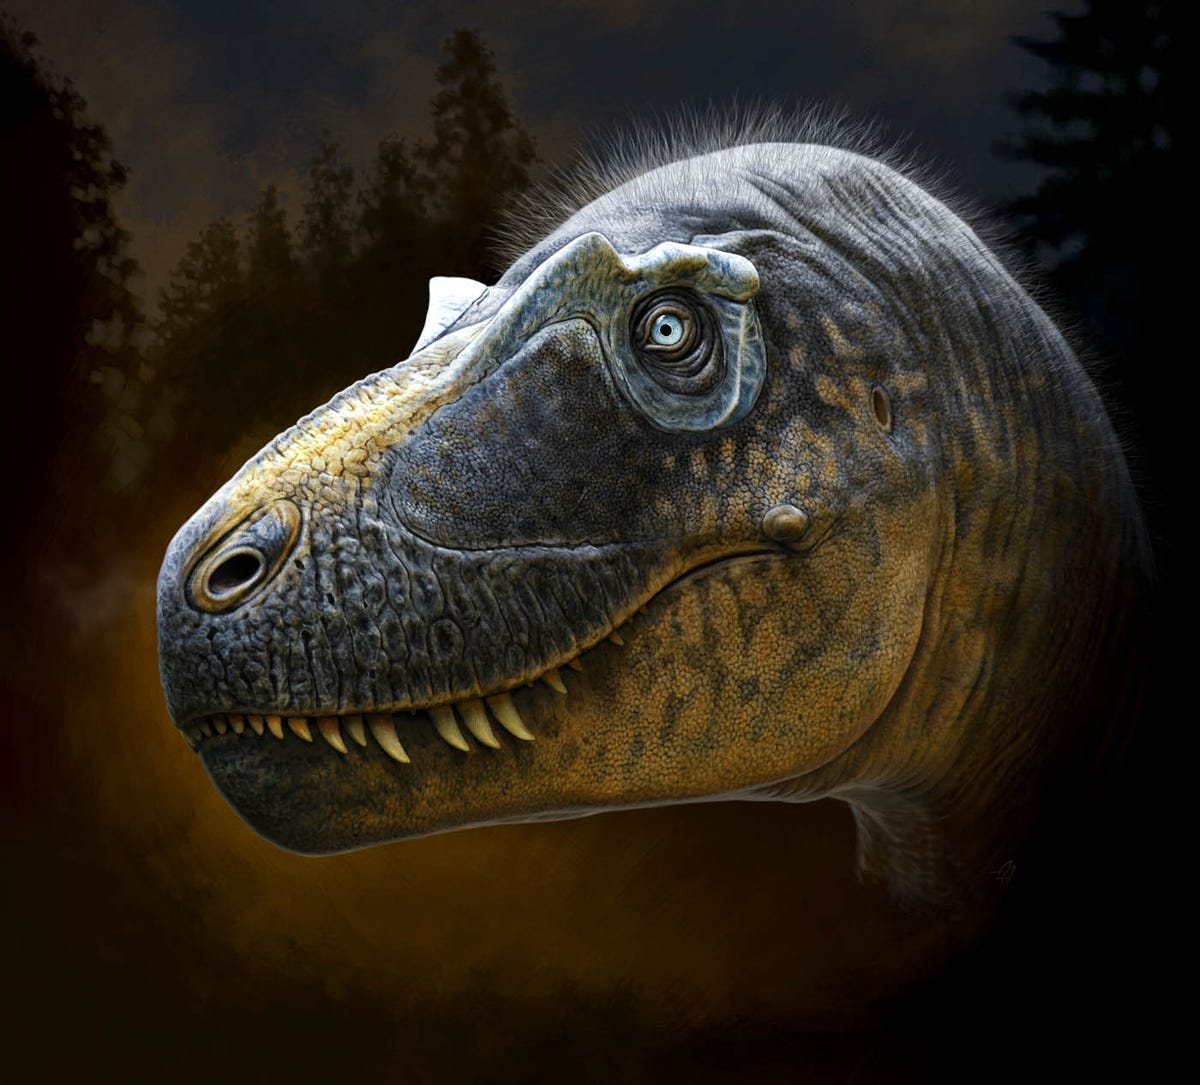 A blue-gray dinosaur head is seen with piercing eyes rimmed with tiny hornlets. The dinosaur's jaw is yellowish-brown and fixed with a frightening set of teeth.